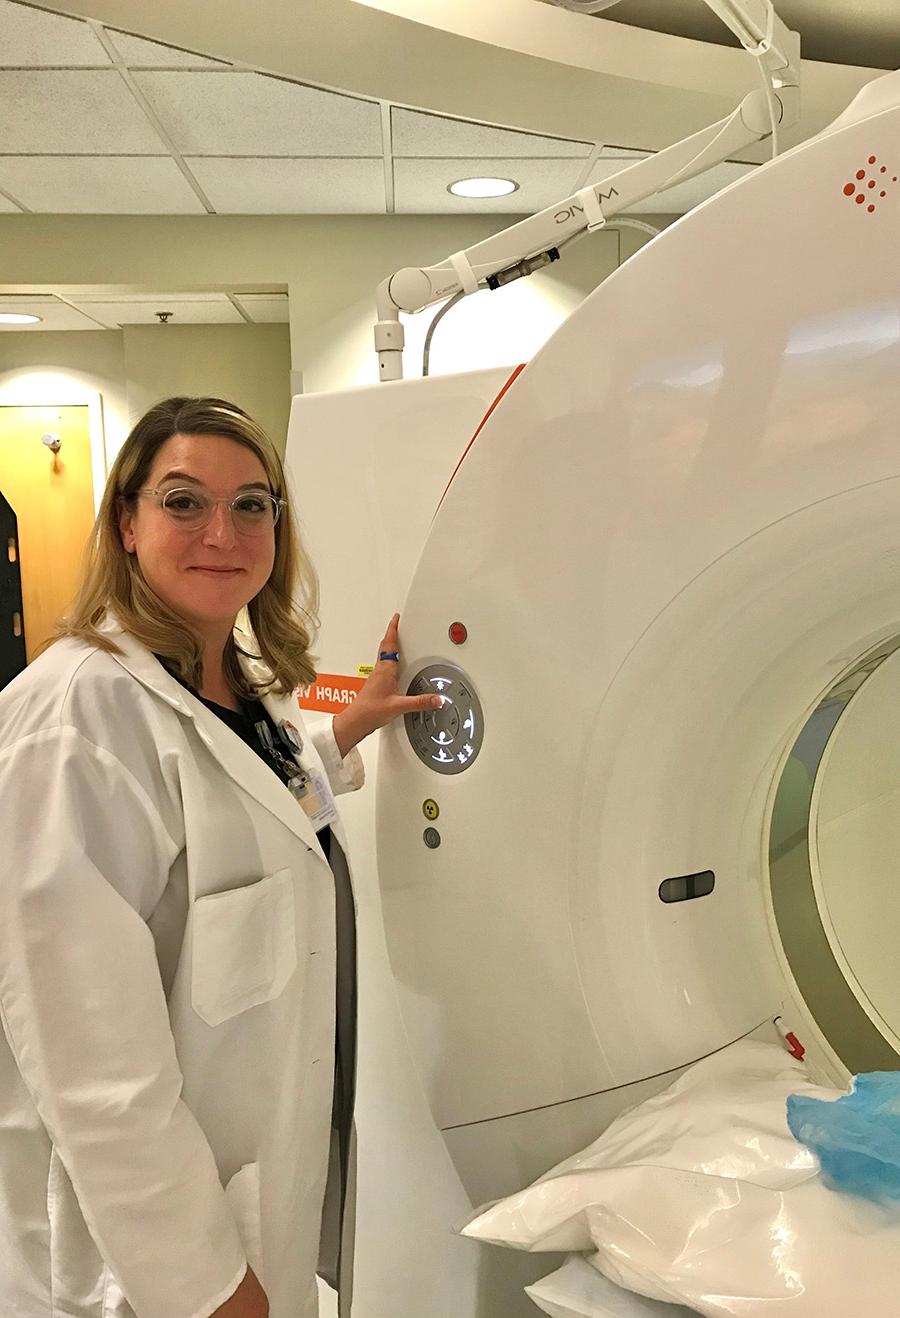 Diane Soulek, who is pursuing her MBA at Northwest, is employed as a senior nuclear medicine technologist at the University of Iowa. (Submitted photo)